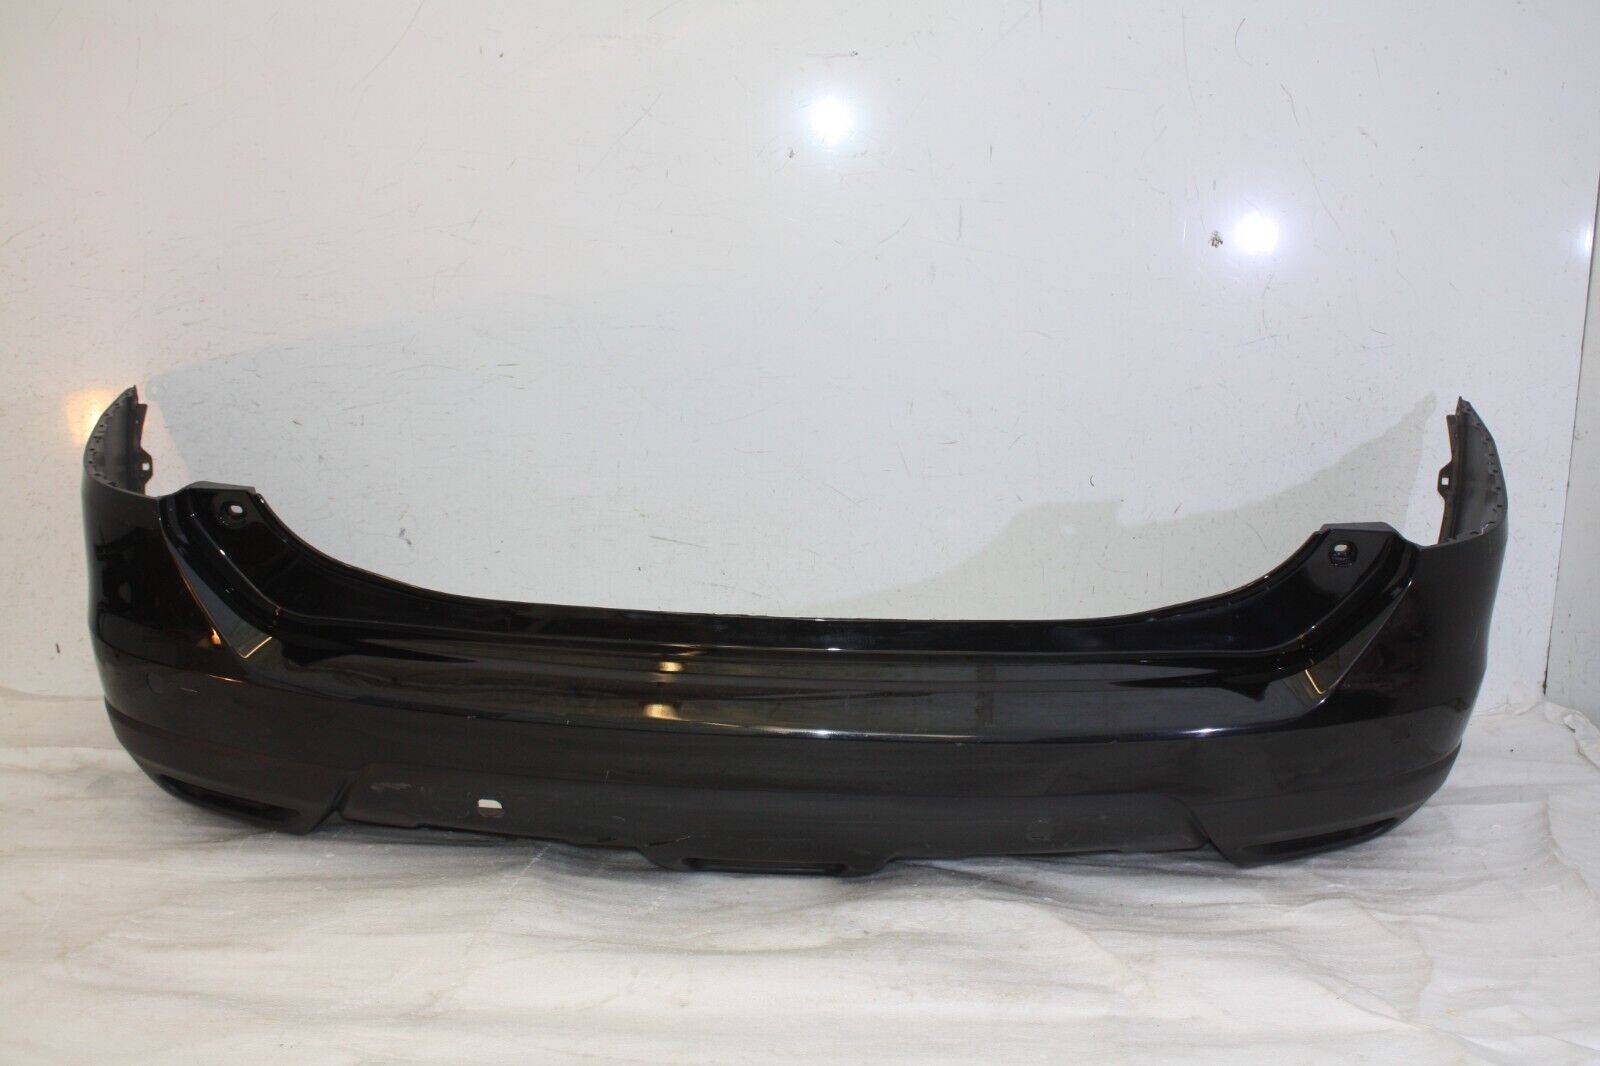 Nissan X Trail Rear Bumper 2014 TO 2017 85022 4CN0H Genuine SEE PICS CAREFULLY 176208735051